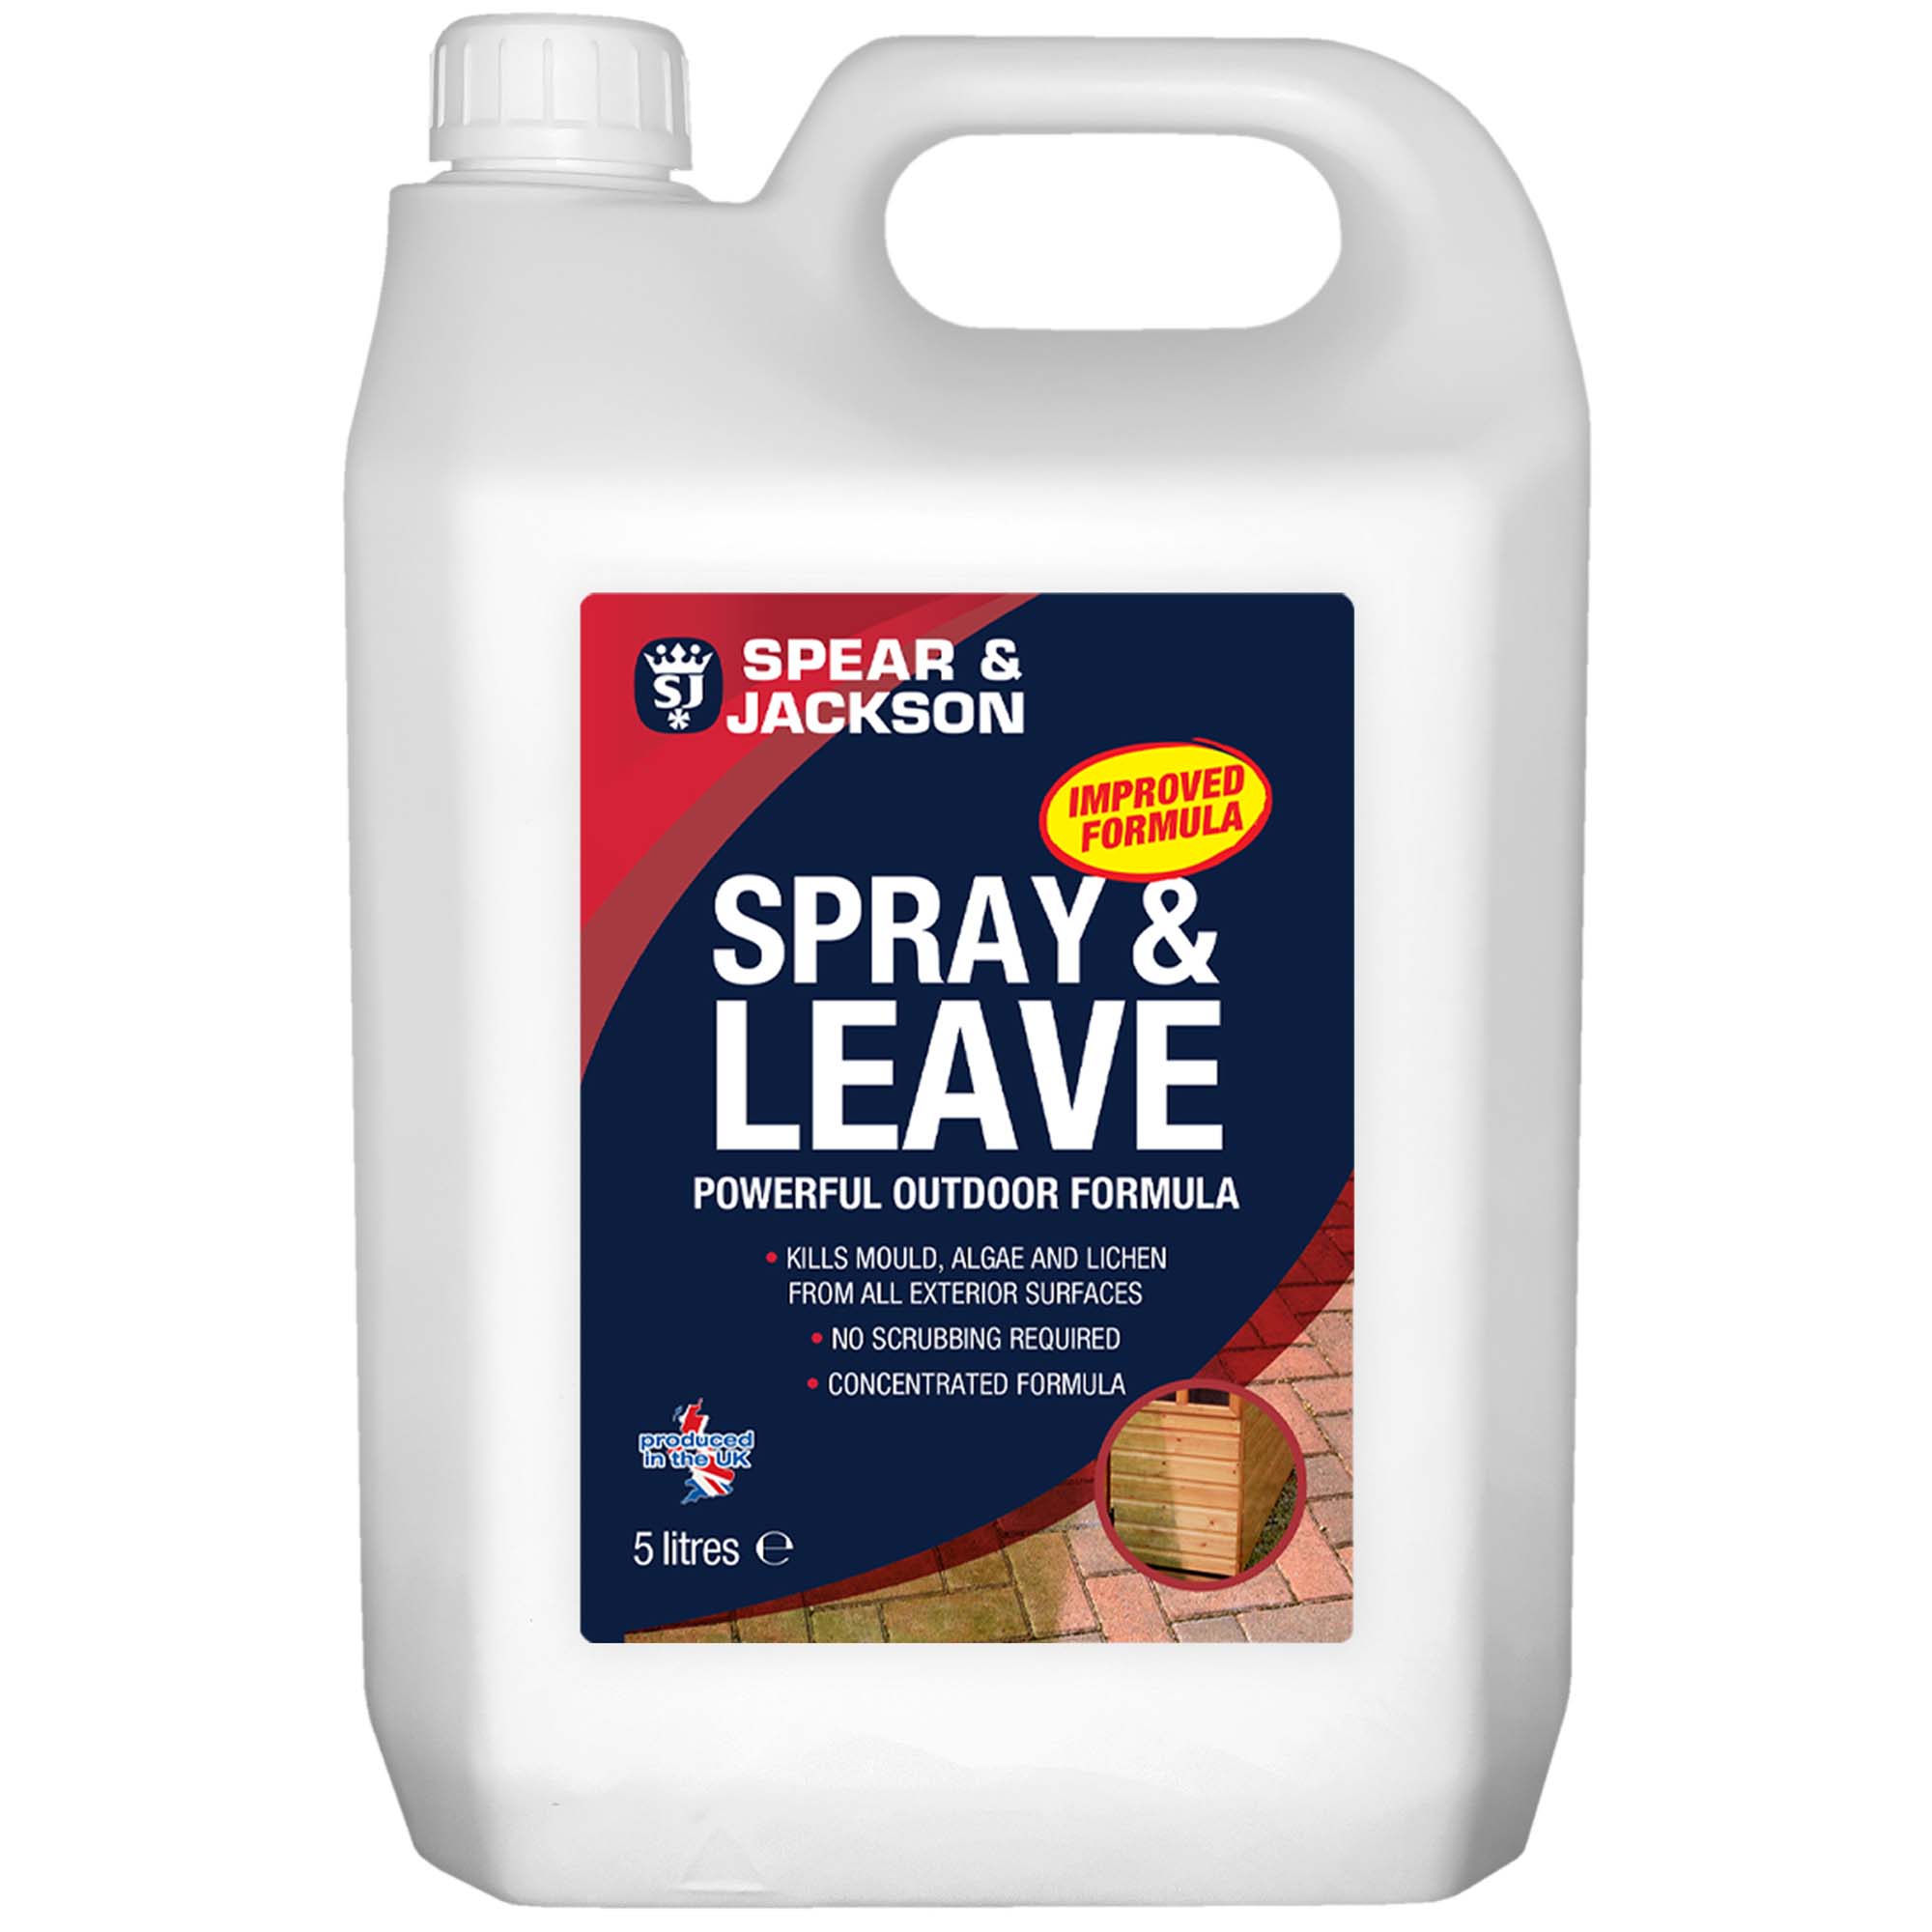 S&J Spray & Leave Concentrate 5L